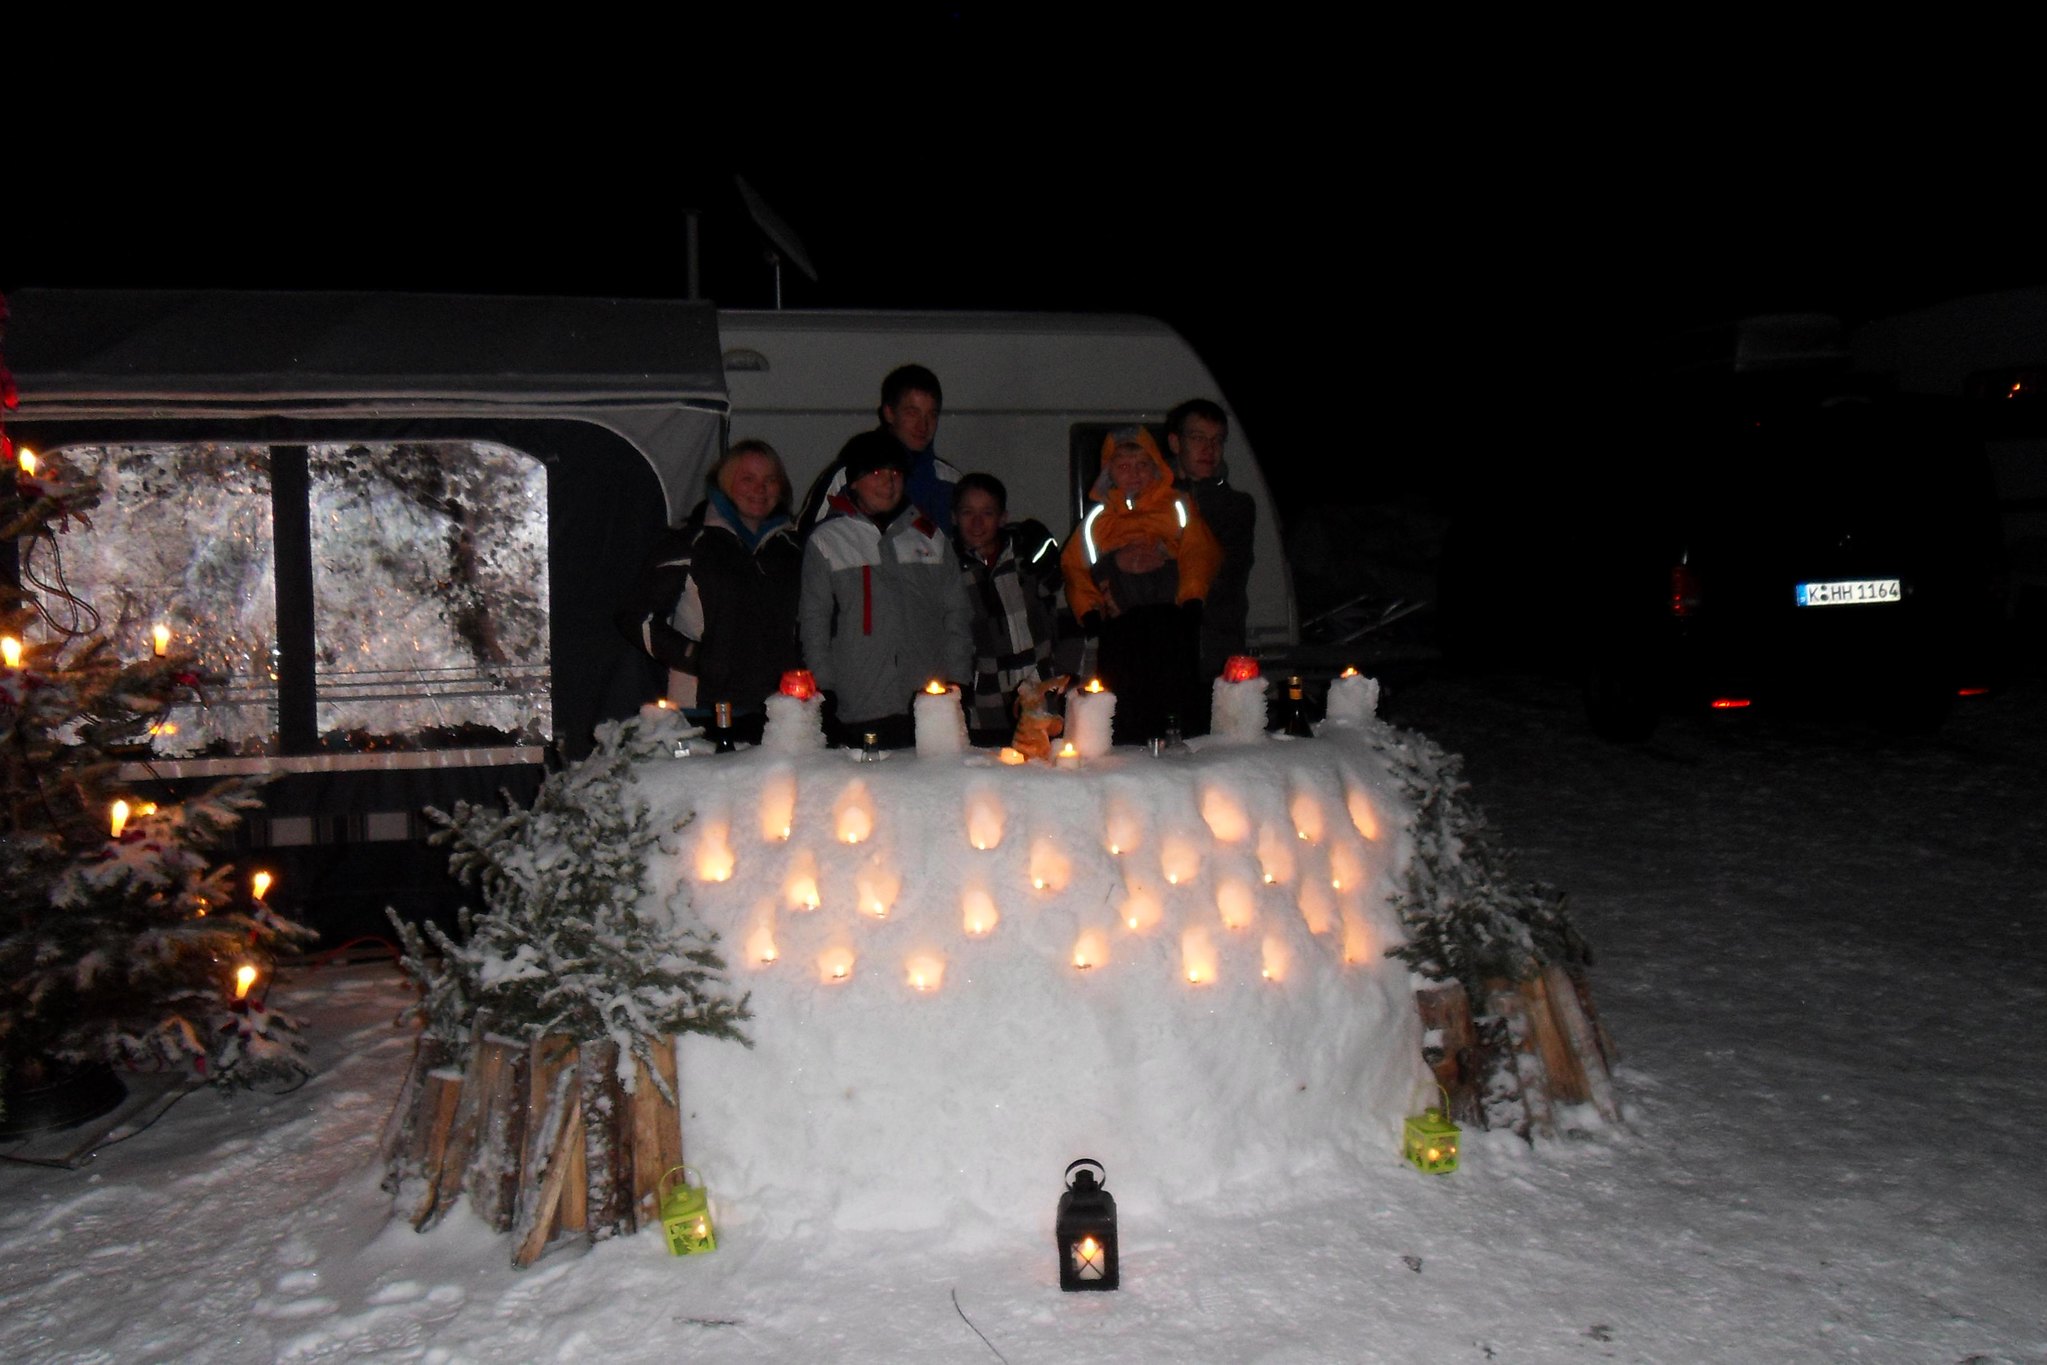 What does camping look like in winter?